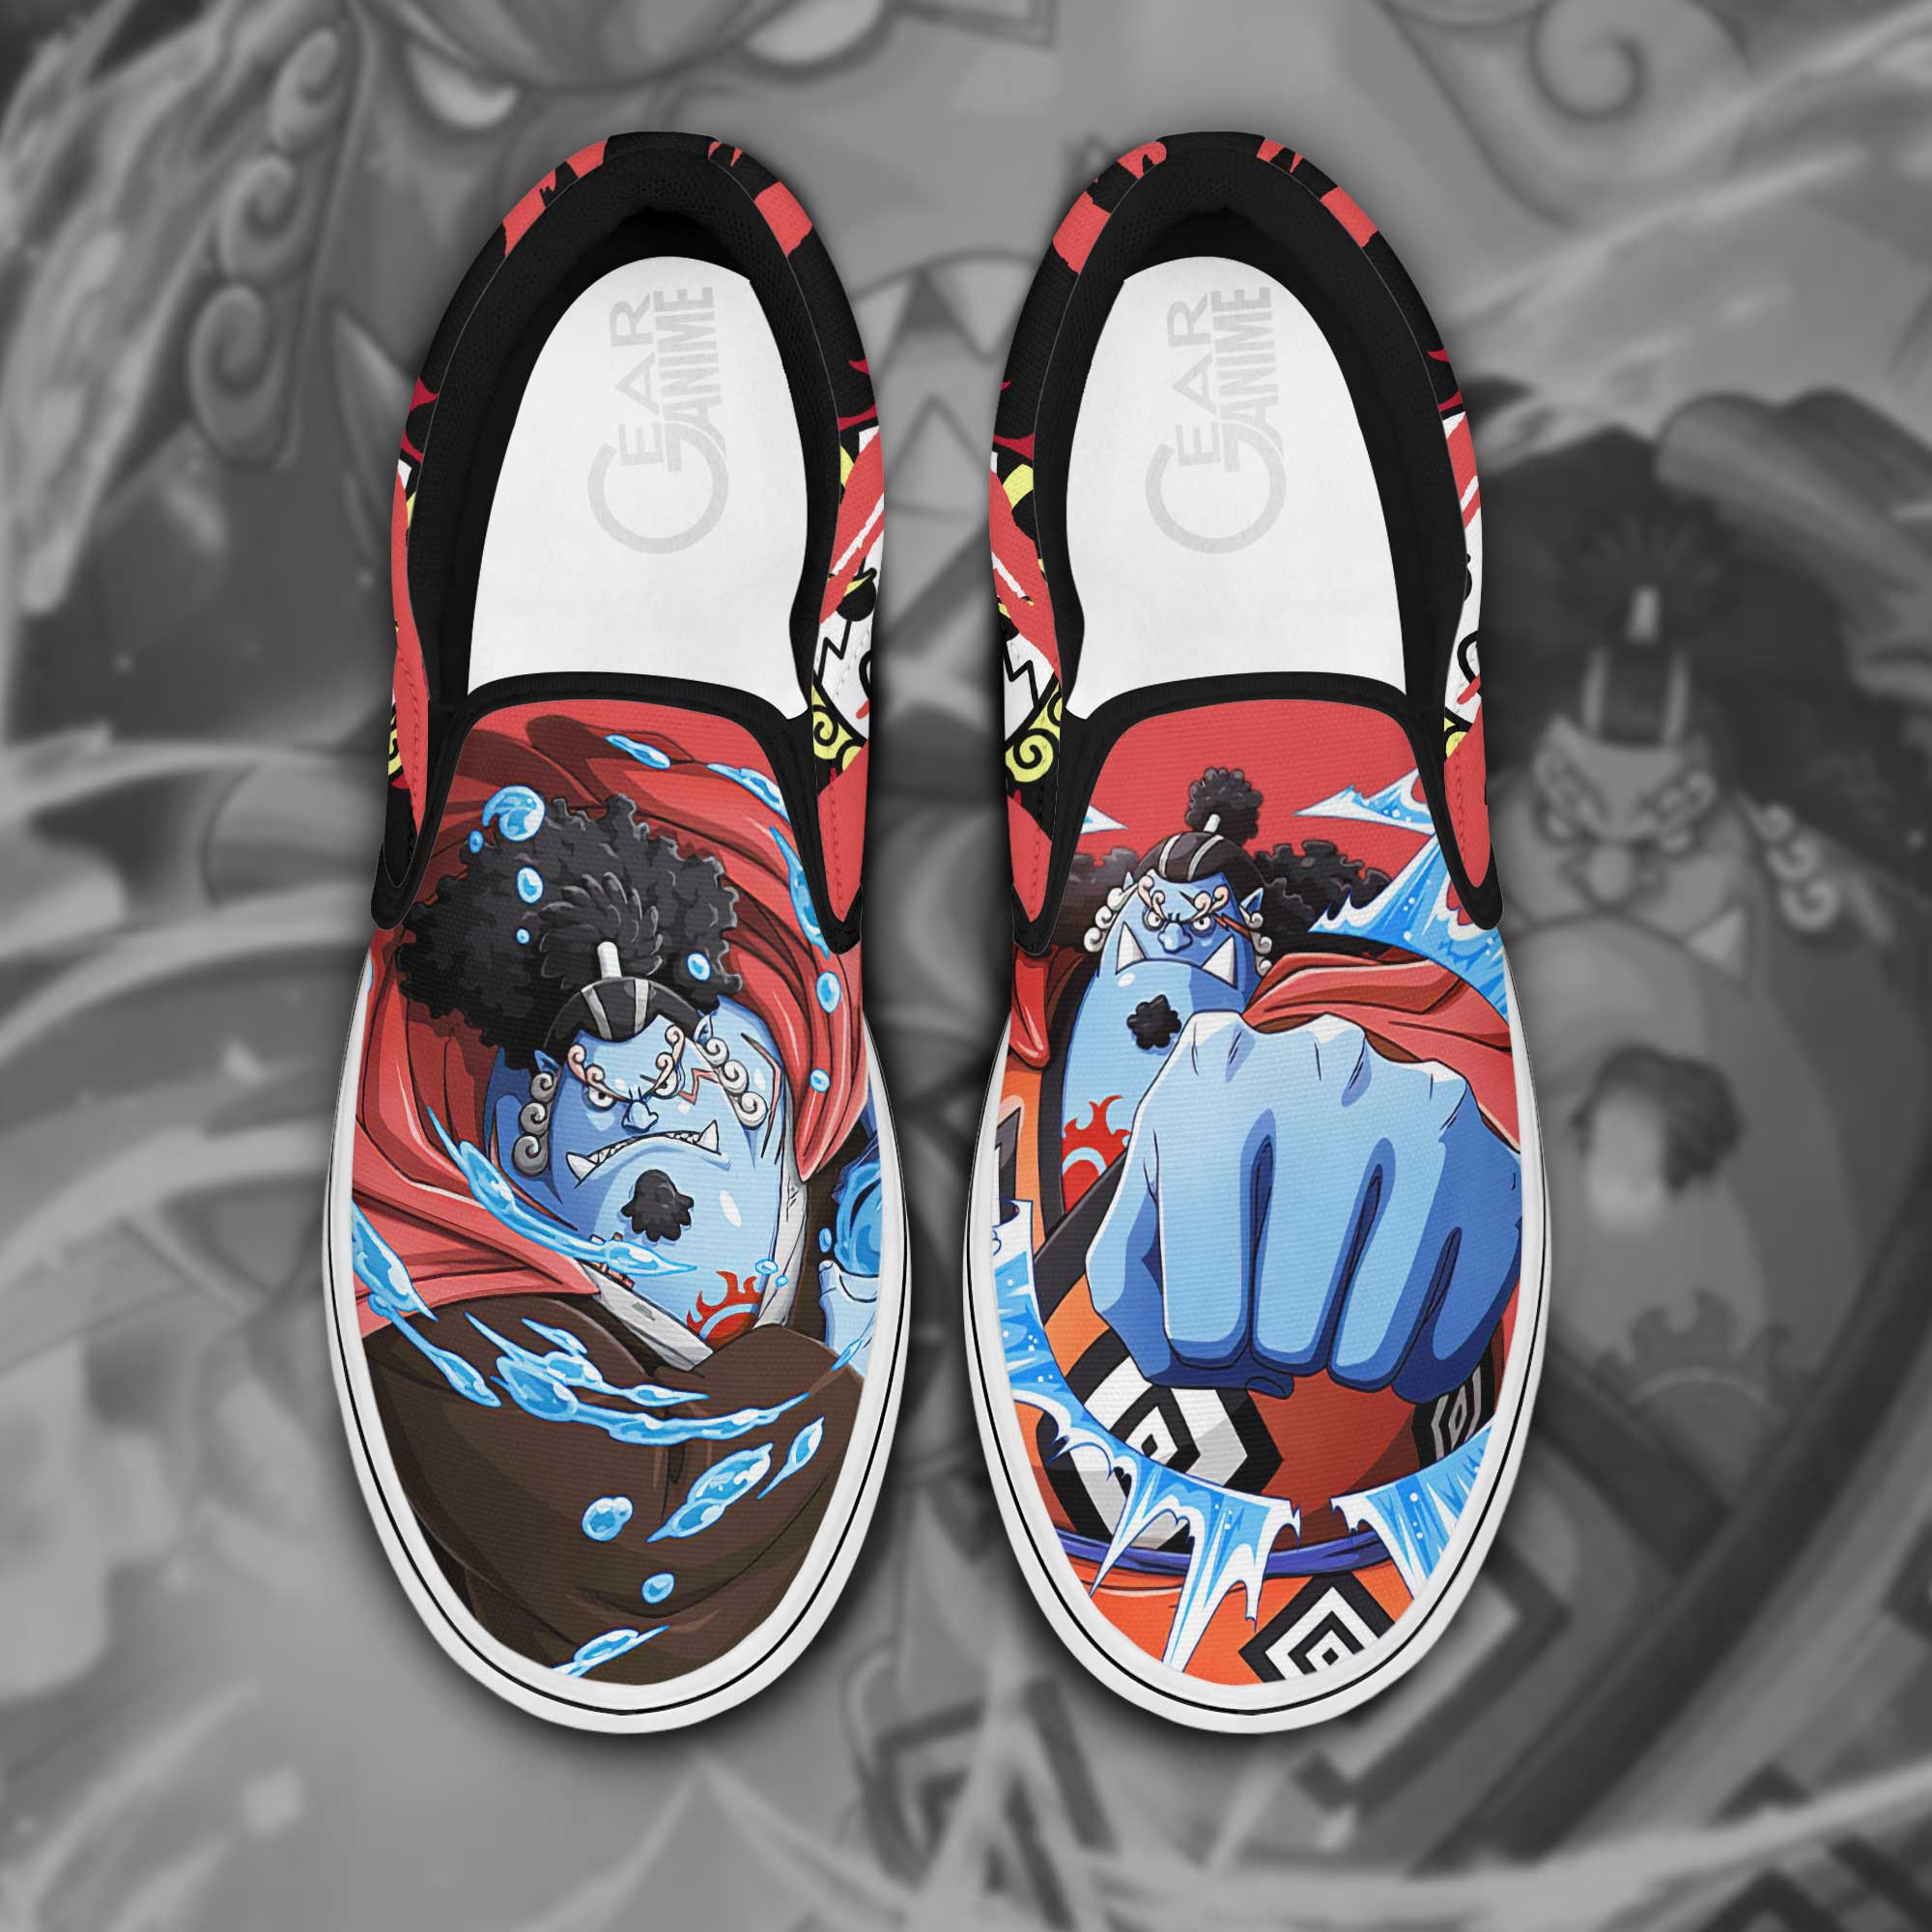 These Sneakers are a must-have for any Anime fan 104